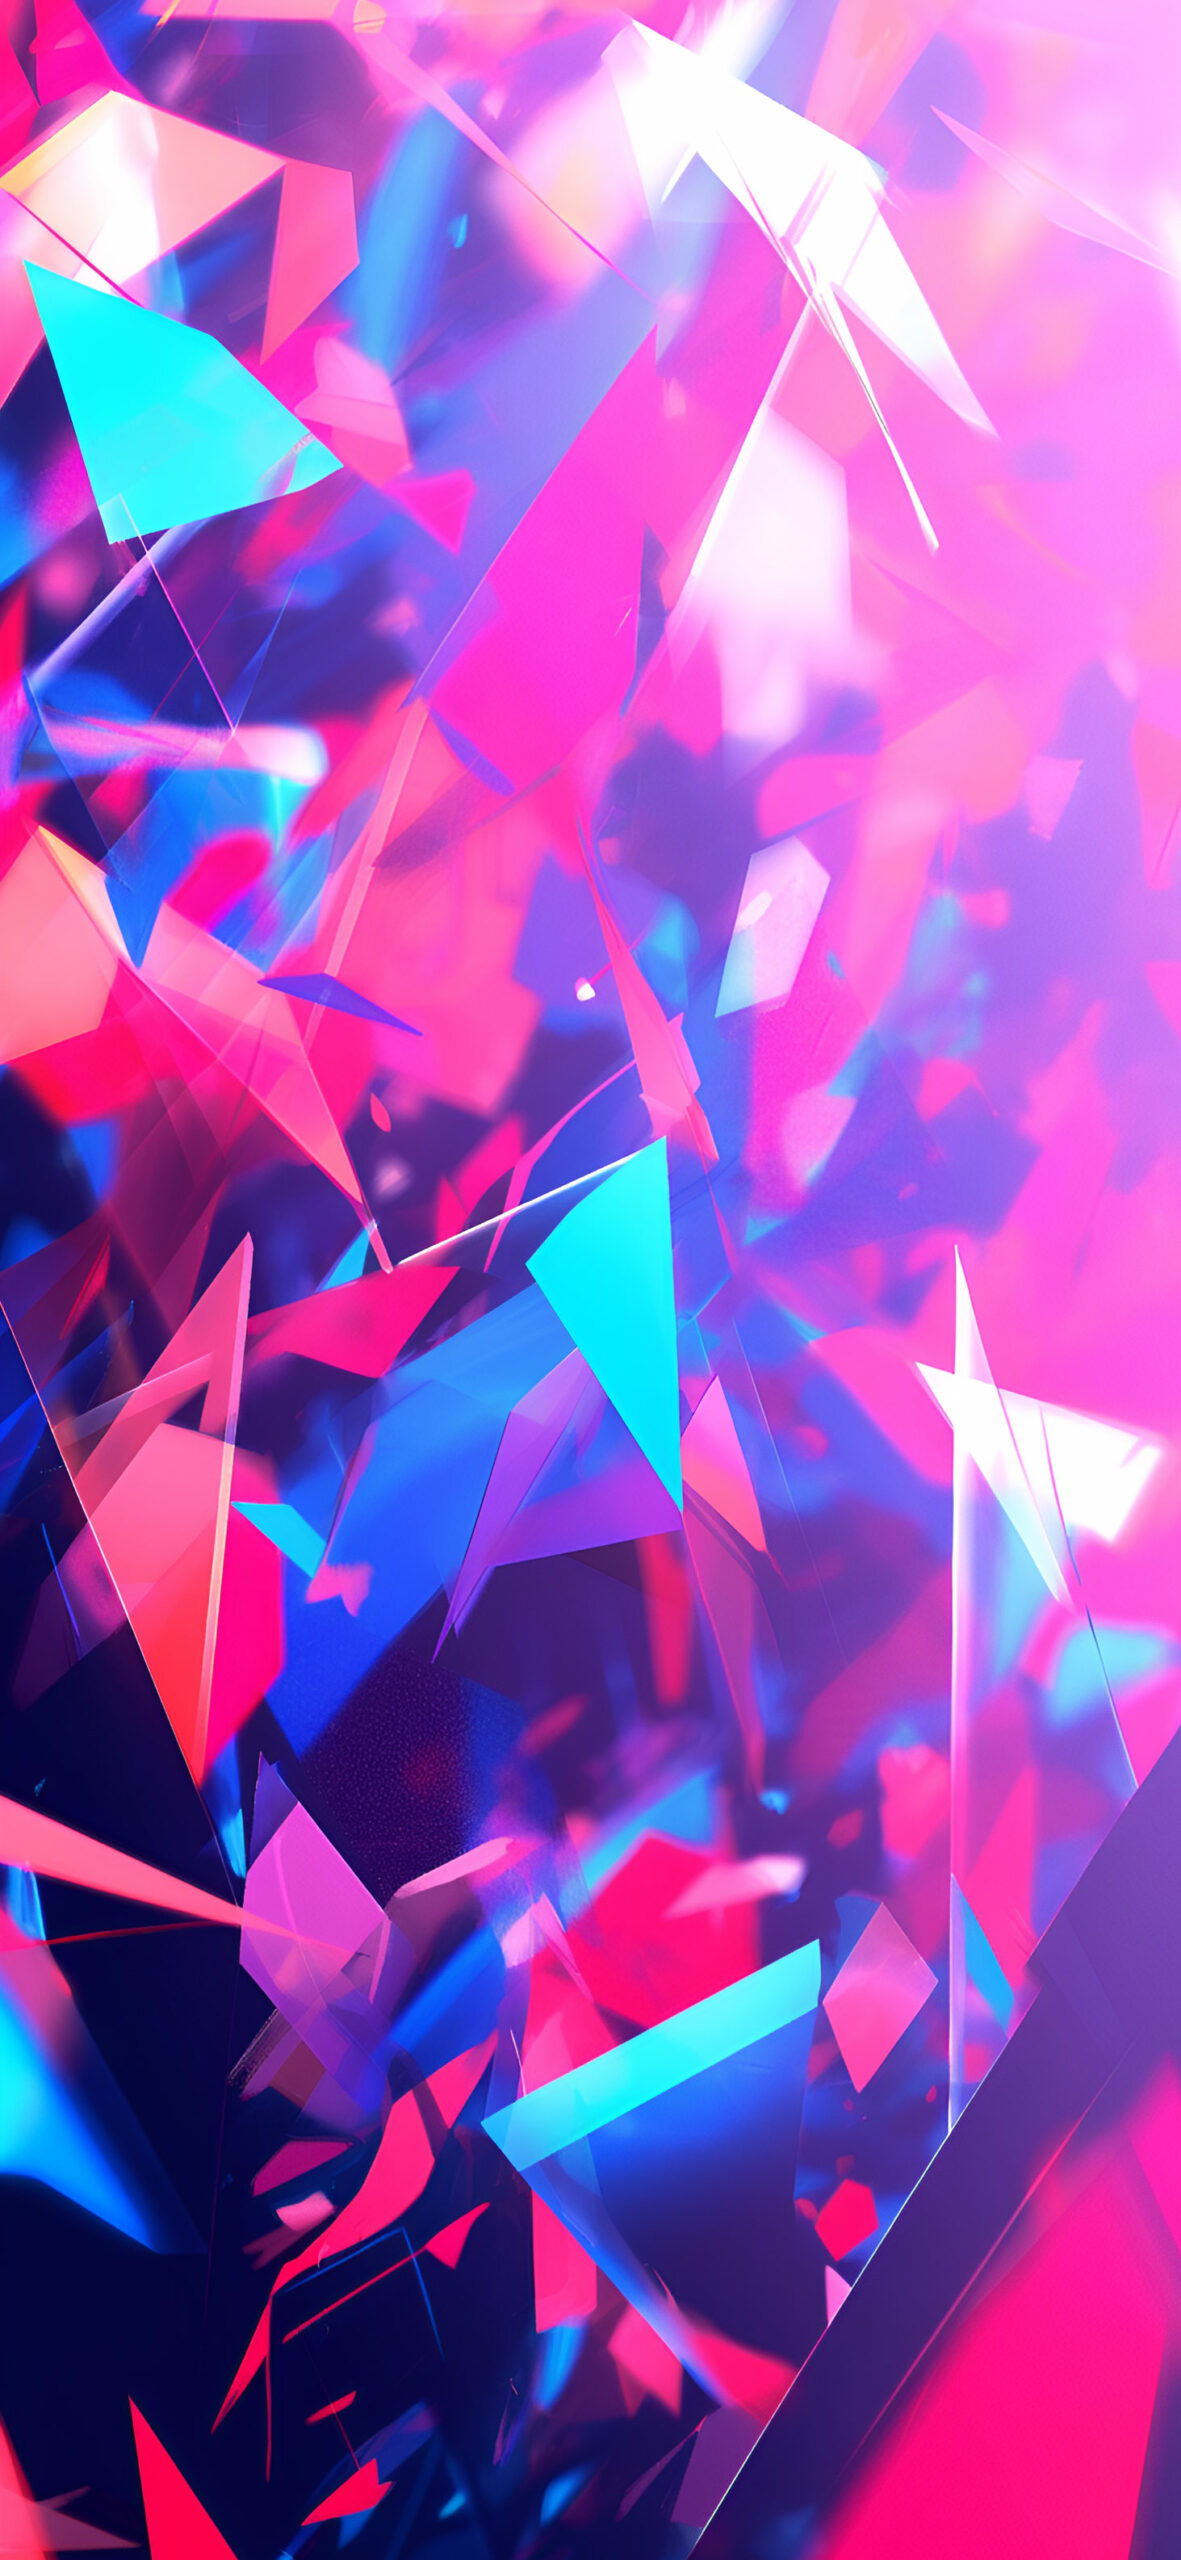 Purple & blue crystals abstract wallpaper High resolution abst